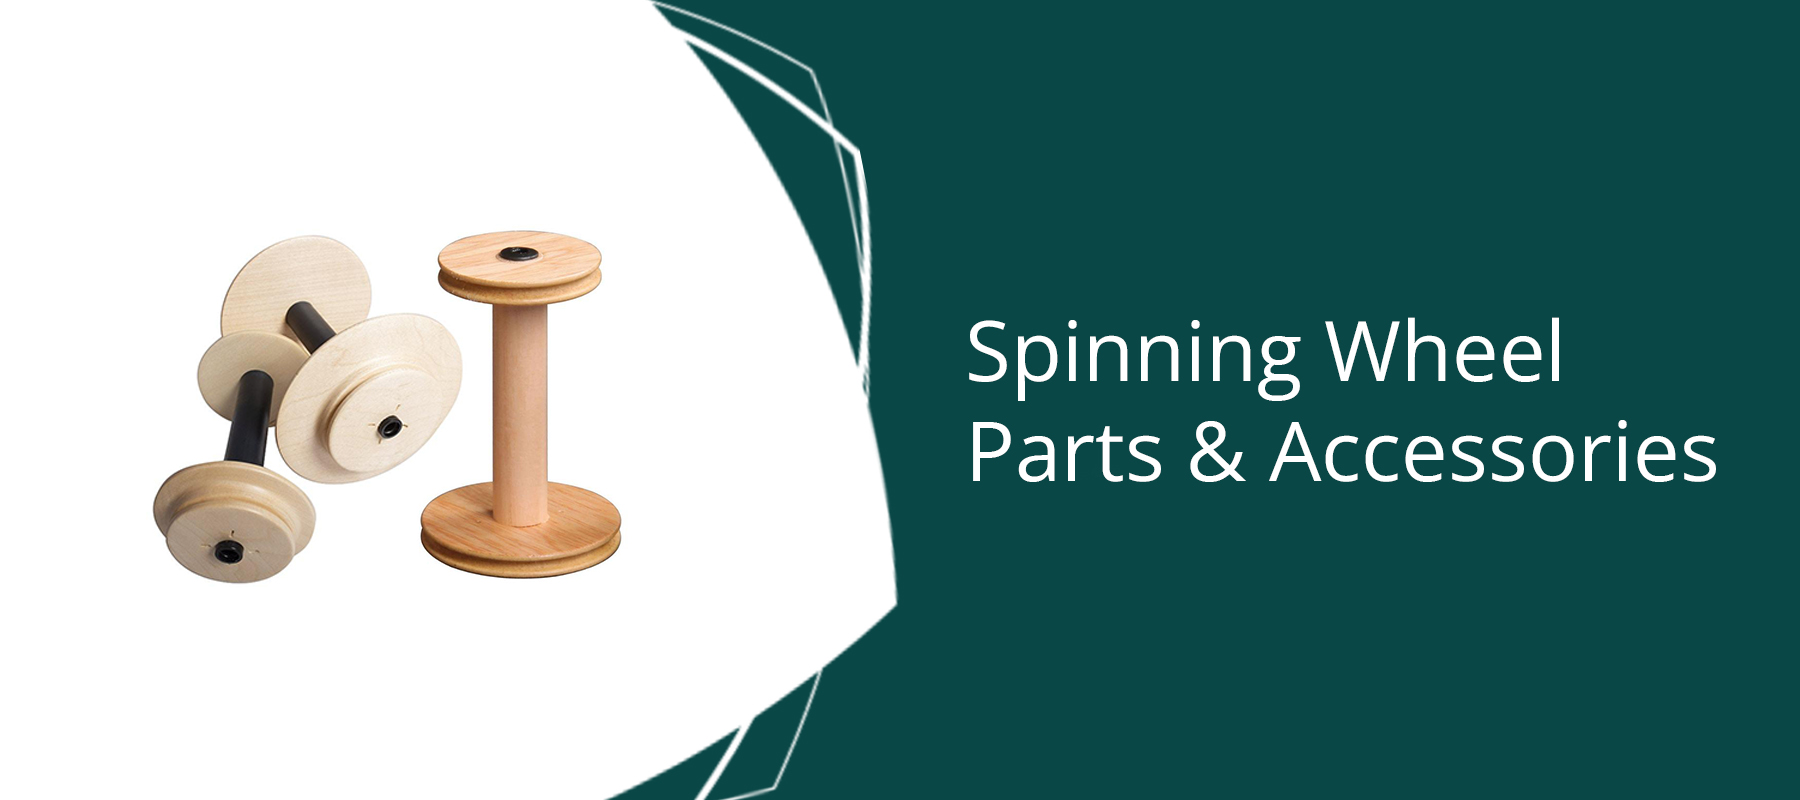 Spinning Wheel Parts & Accessories